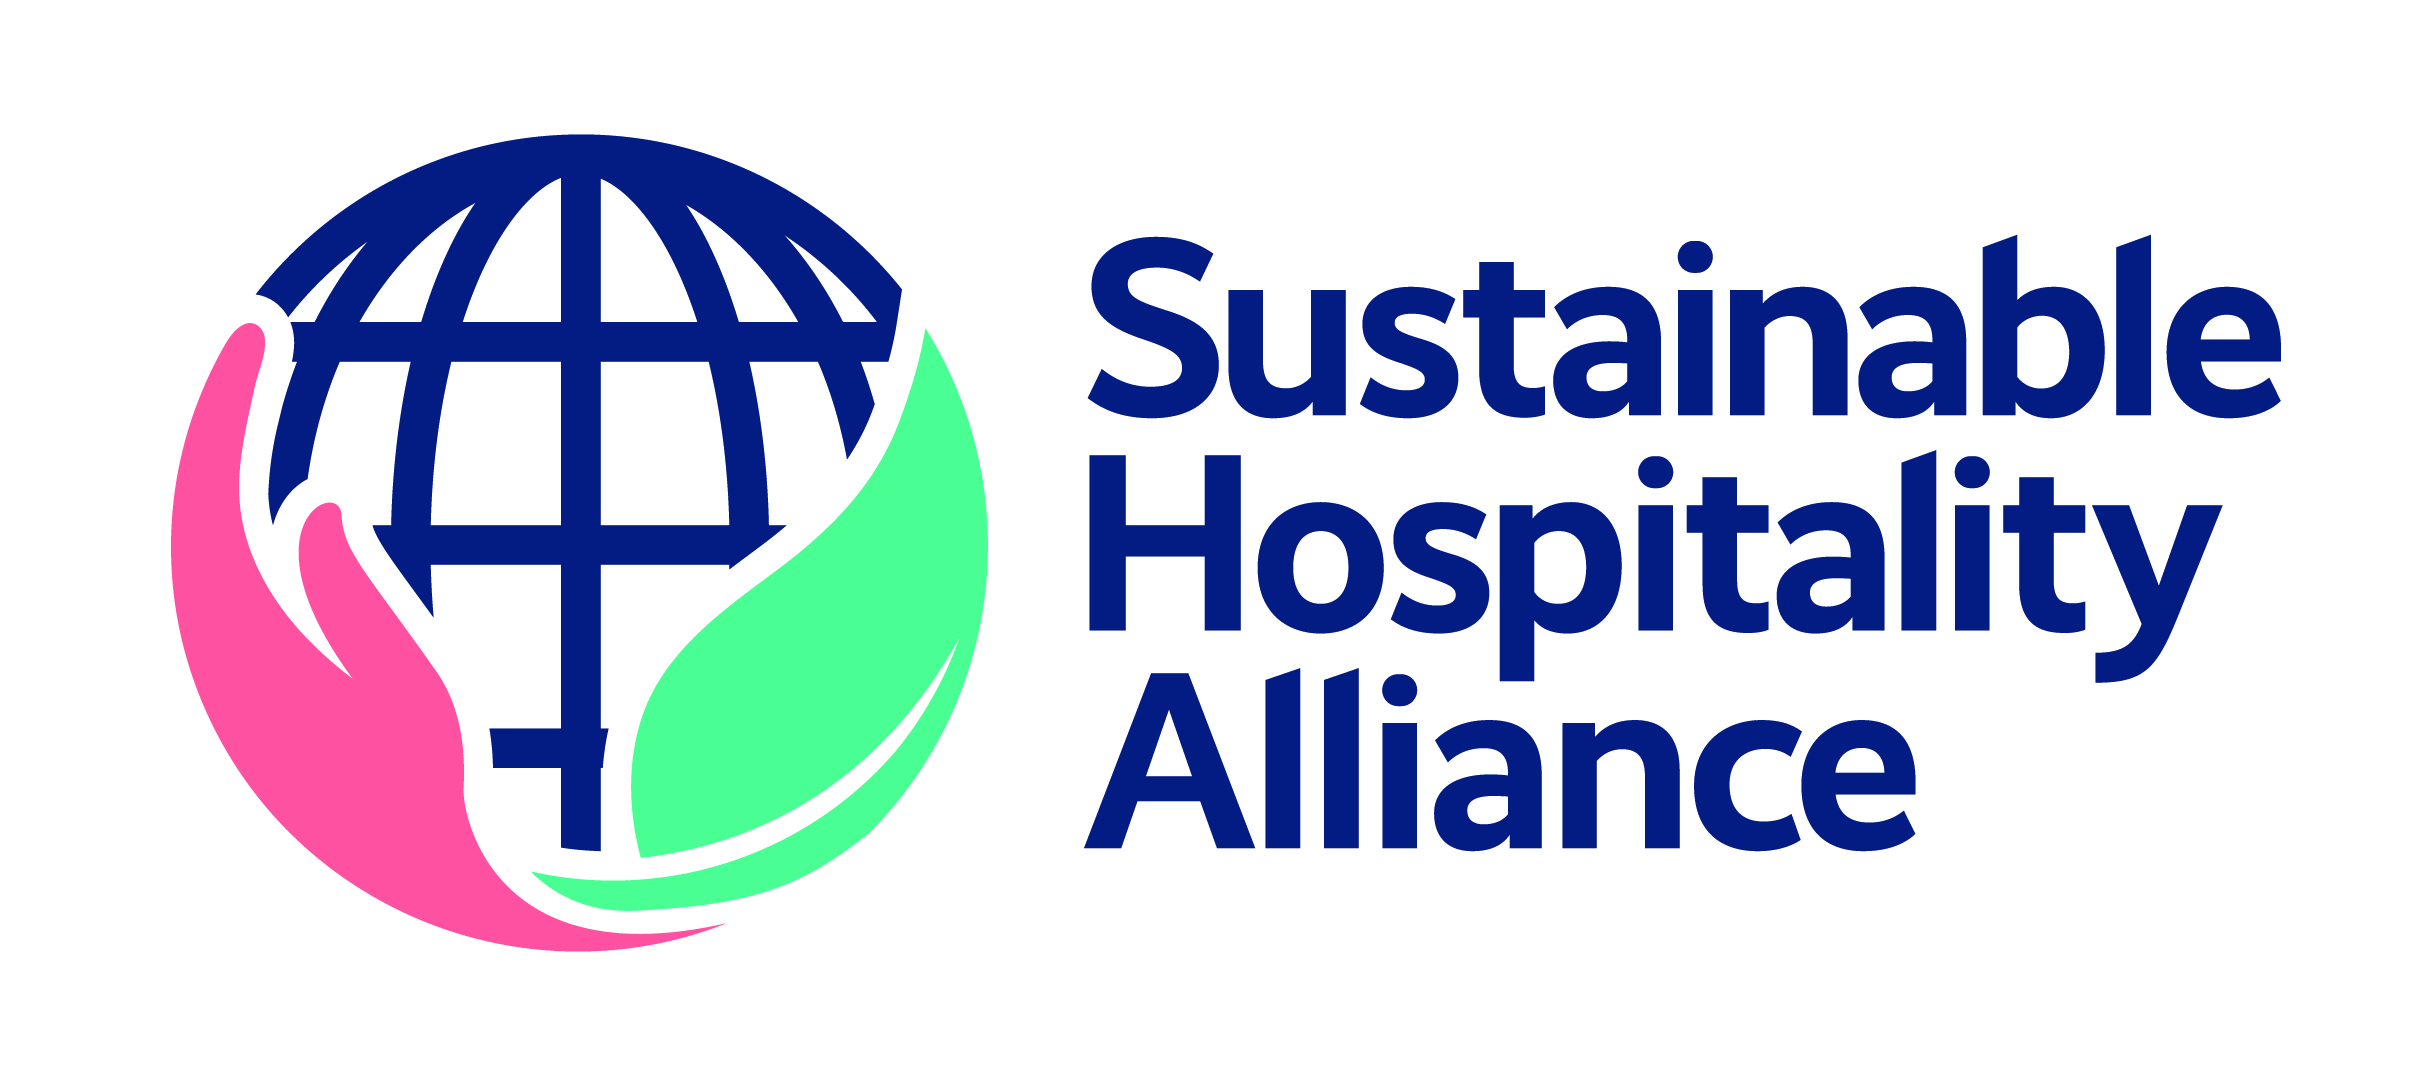 Profile picture for user info@sustainablehospitalityalliance.org